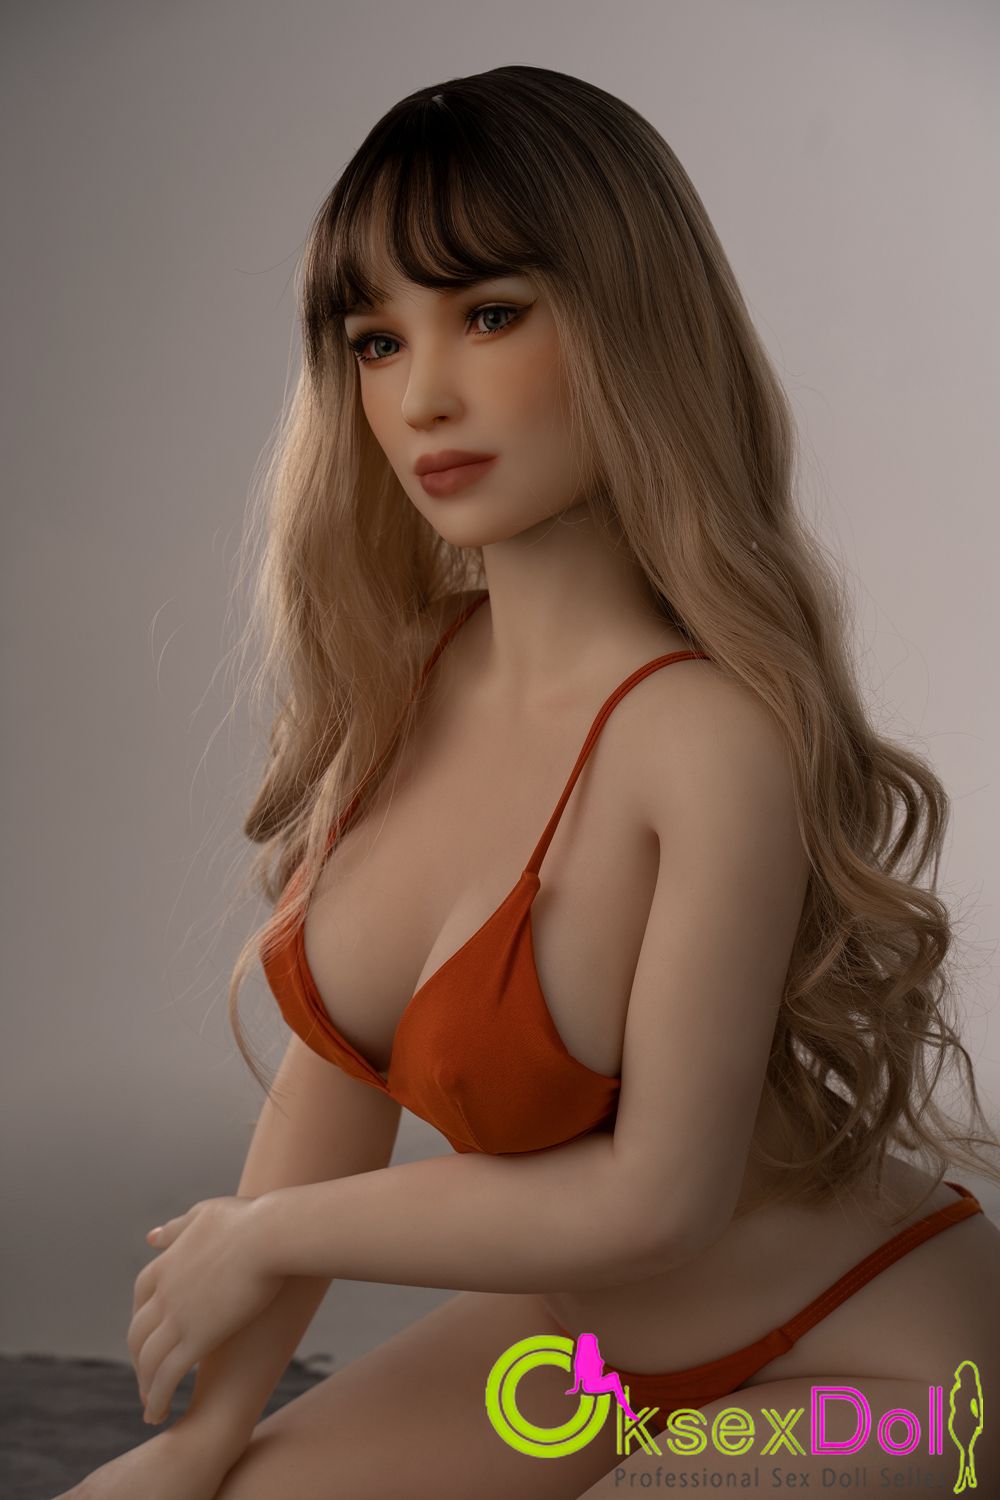 AXB doll Images